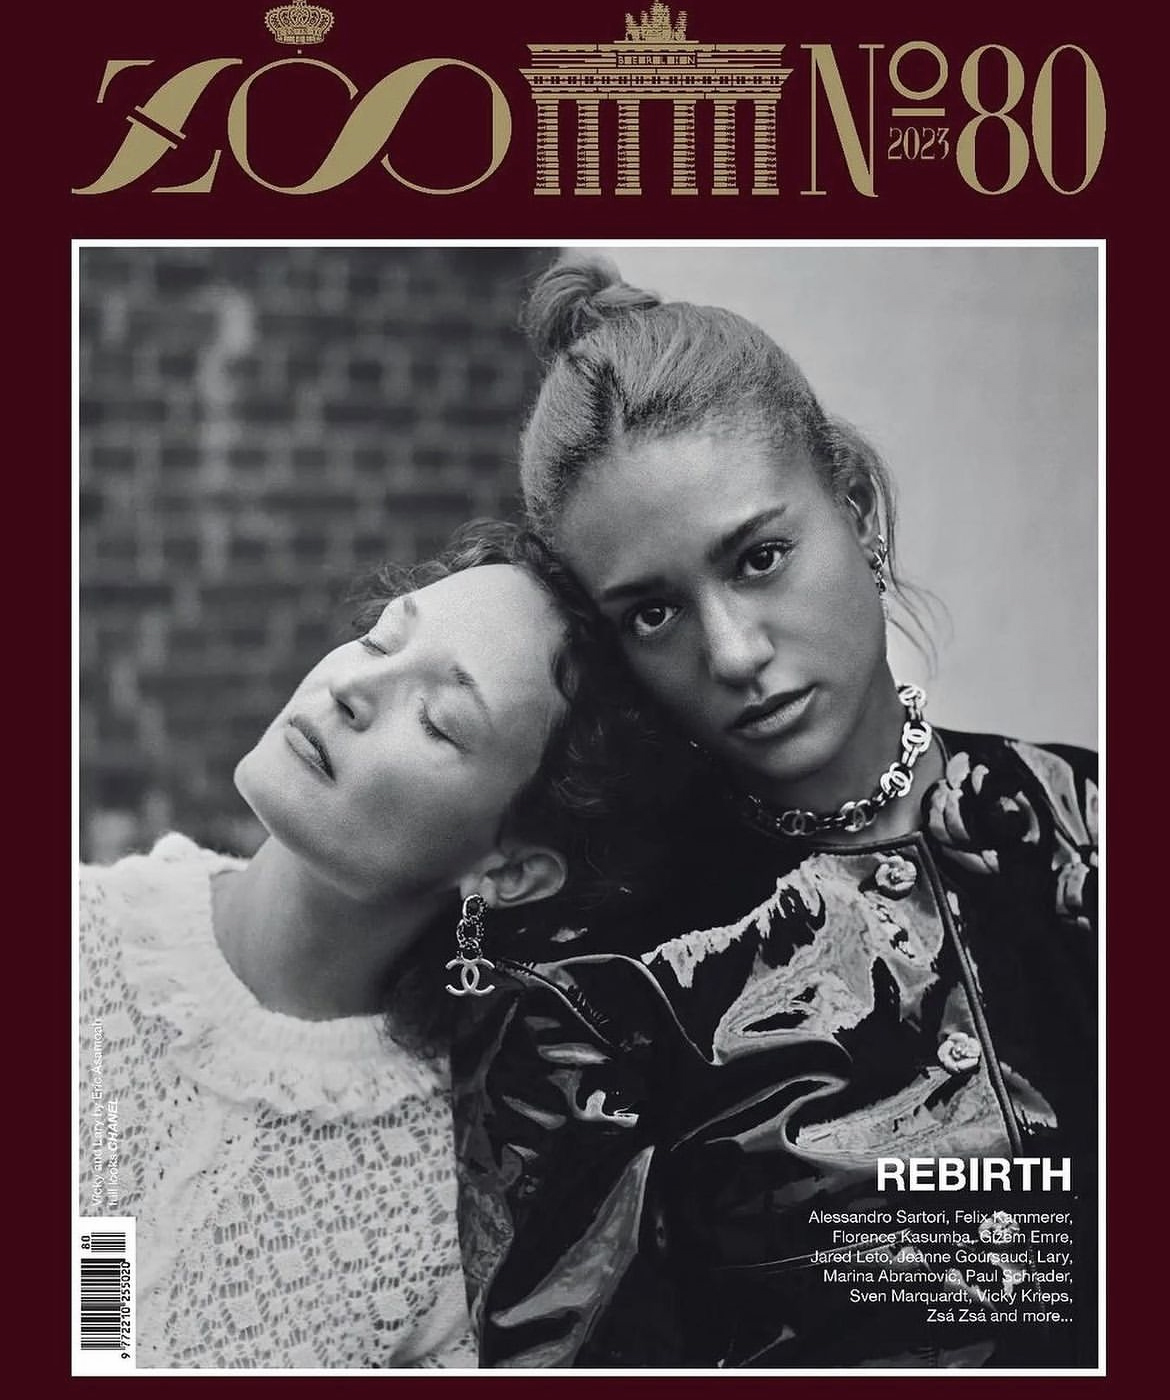 the singer and actress Lary and the actress Vicky Krieps for a cover of Zoo magazine anniversary issue